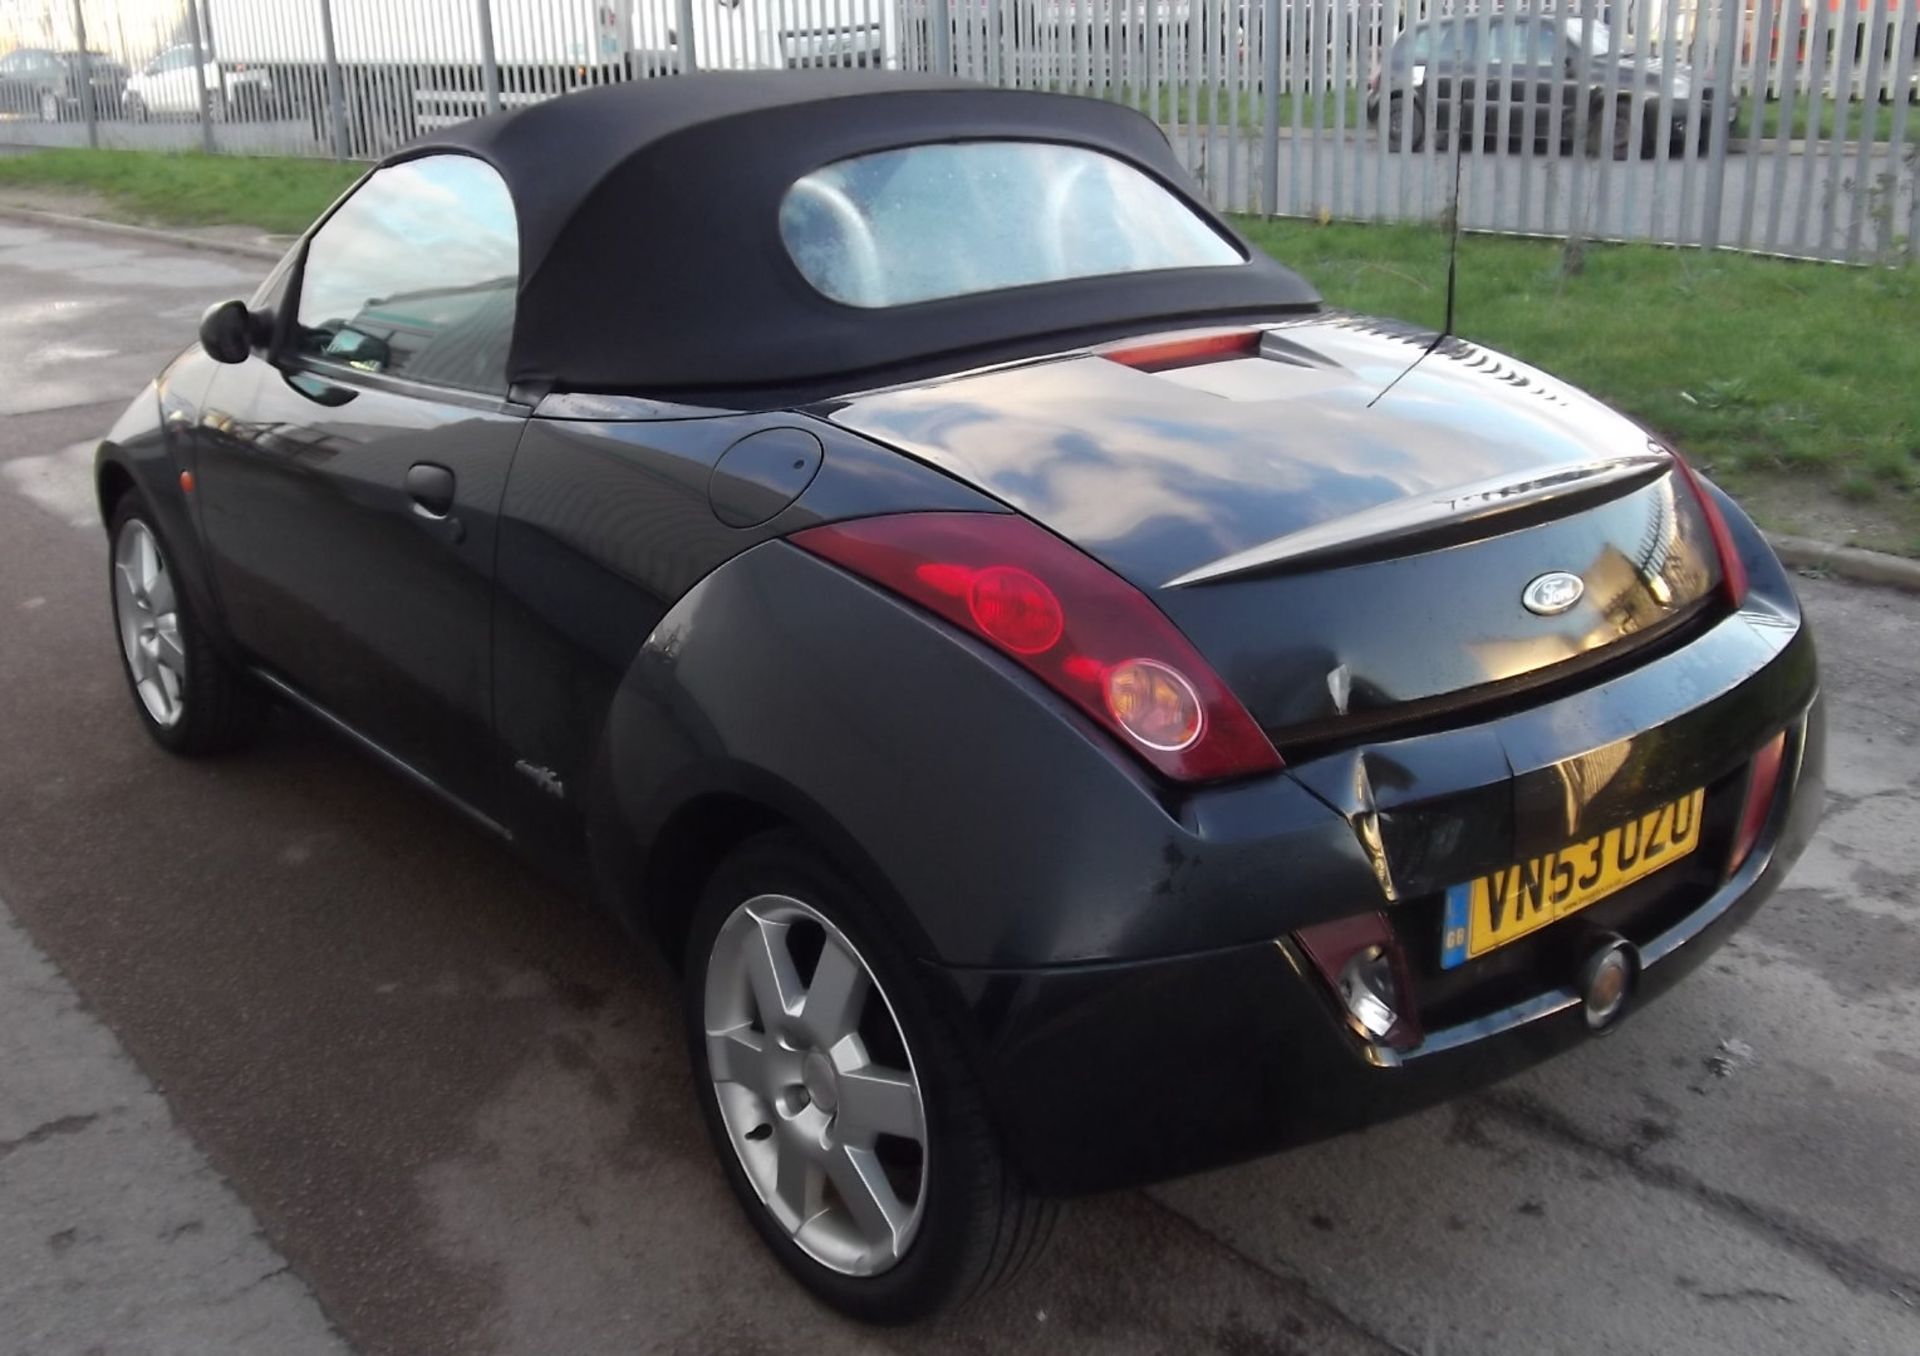 2003 Ford StreetKa 1.6 2 Door Convertible - CL505 - NO VAT ON THE HAMMER - Location: Corby, Northamp - Image 4 of 16